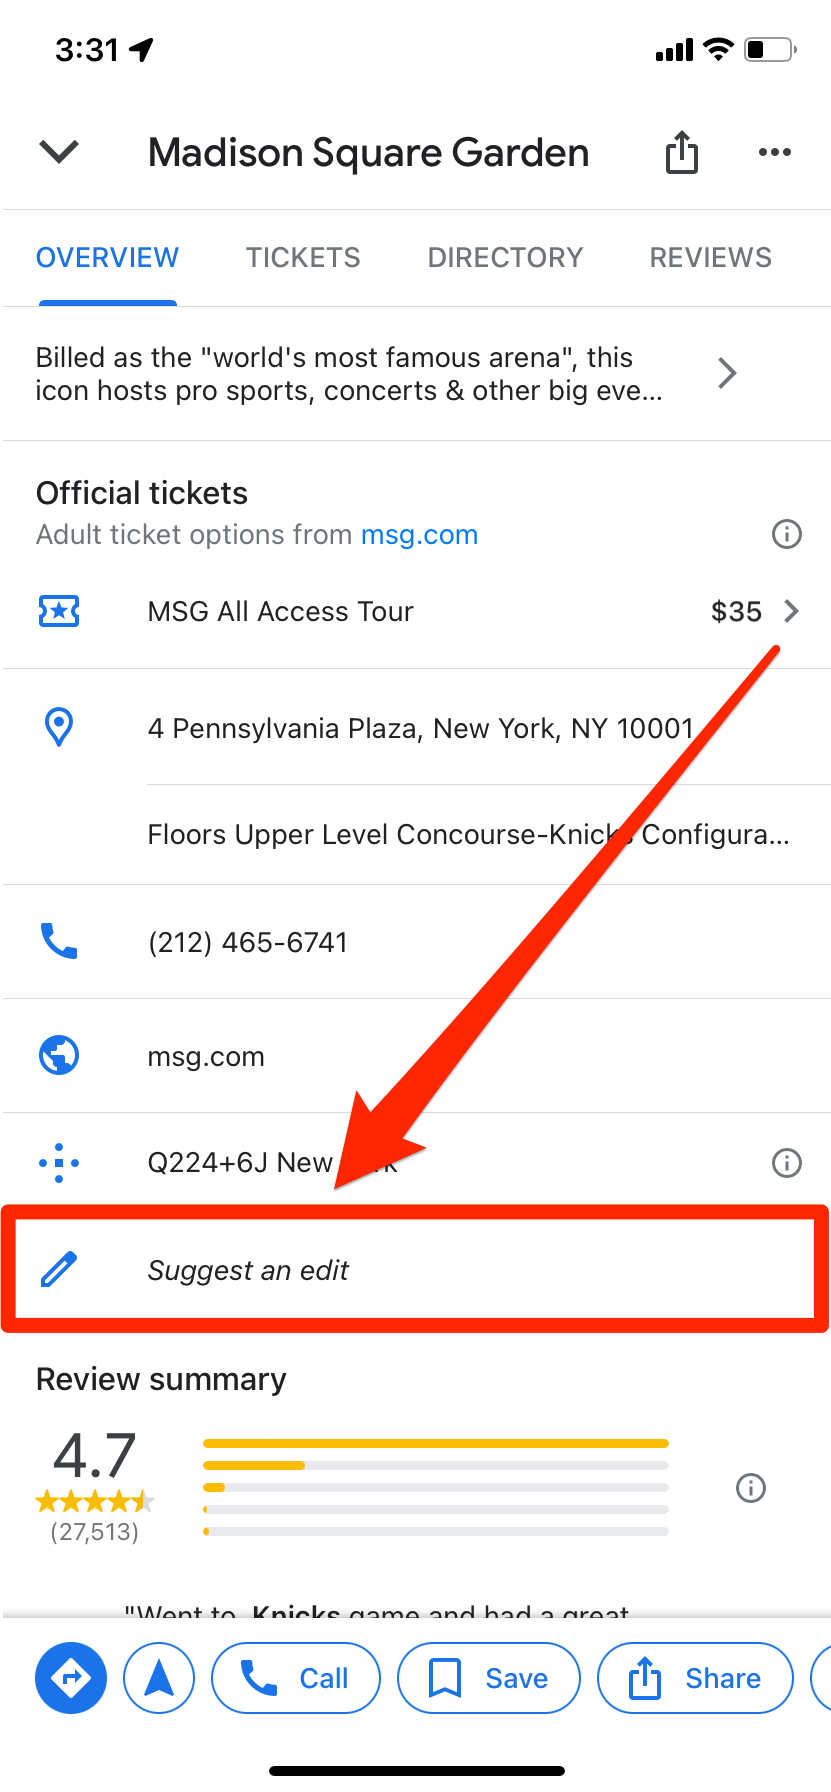 The Google Maps info page for Madison Square Garden, with the "Suggest an edit" option highl